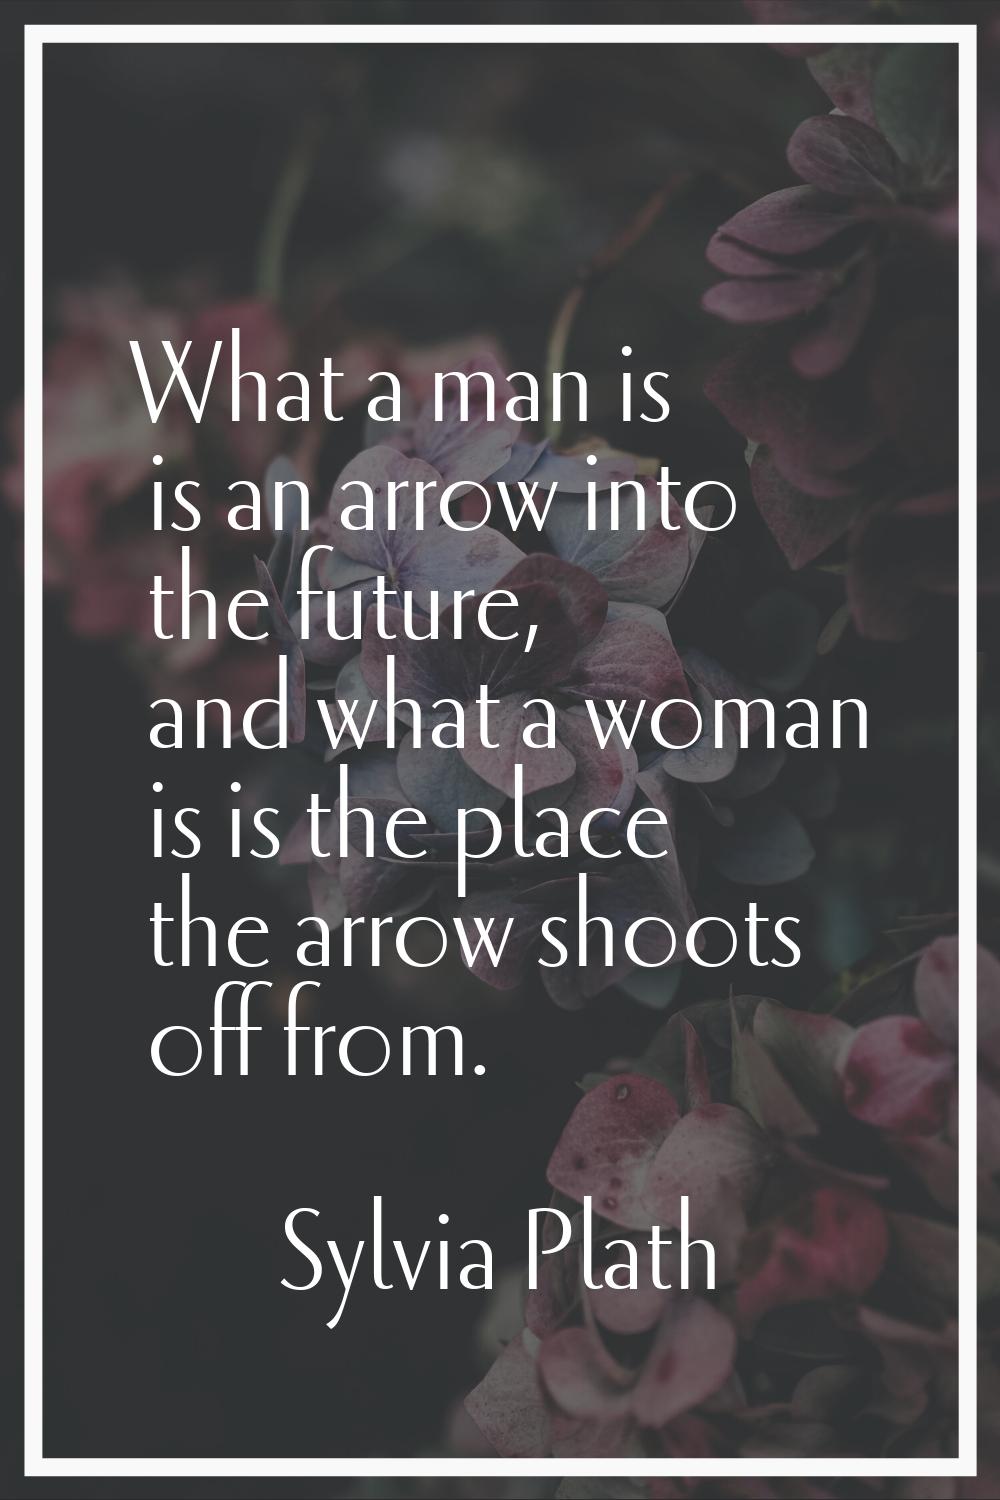 What a man is is an arrow into the future, and what a woman is is the place the arrow shoots off fr